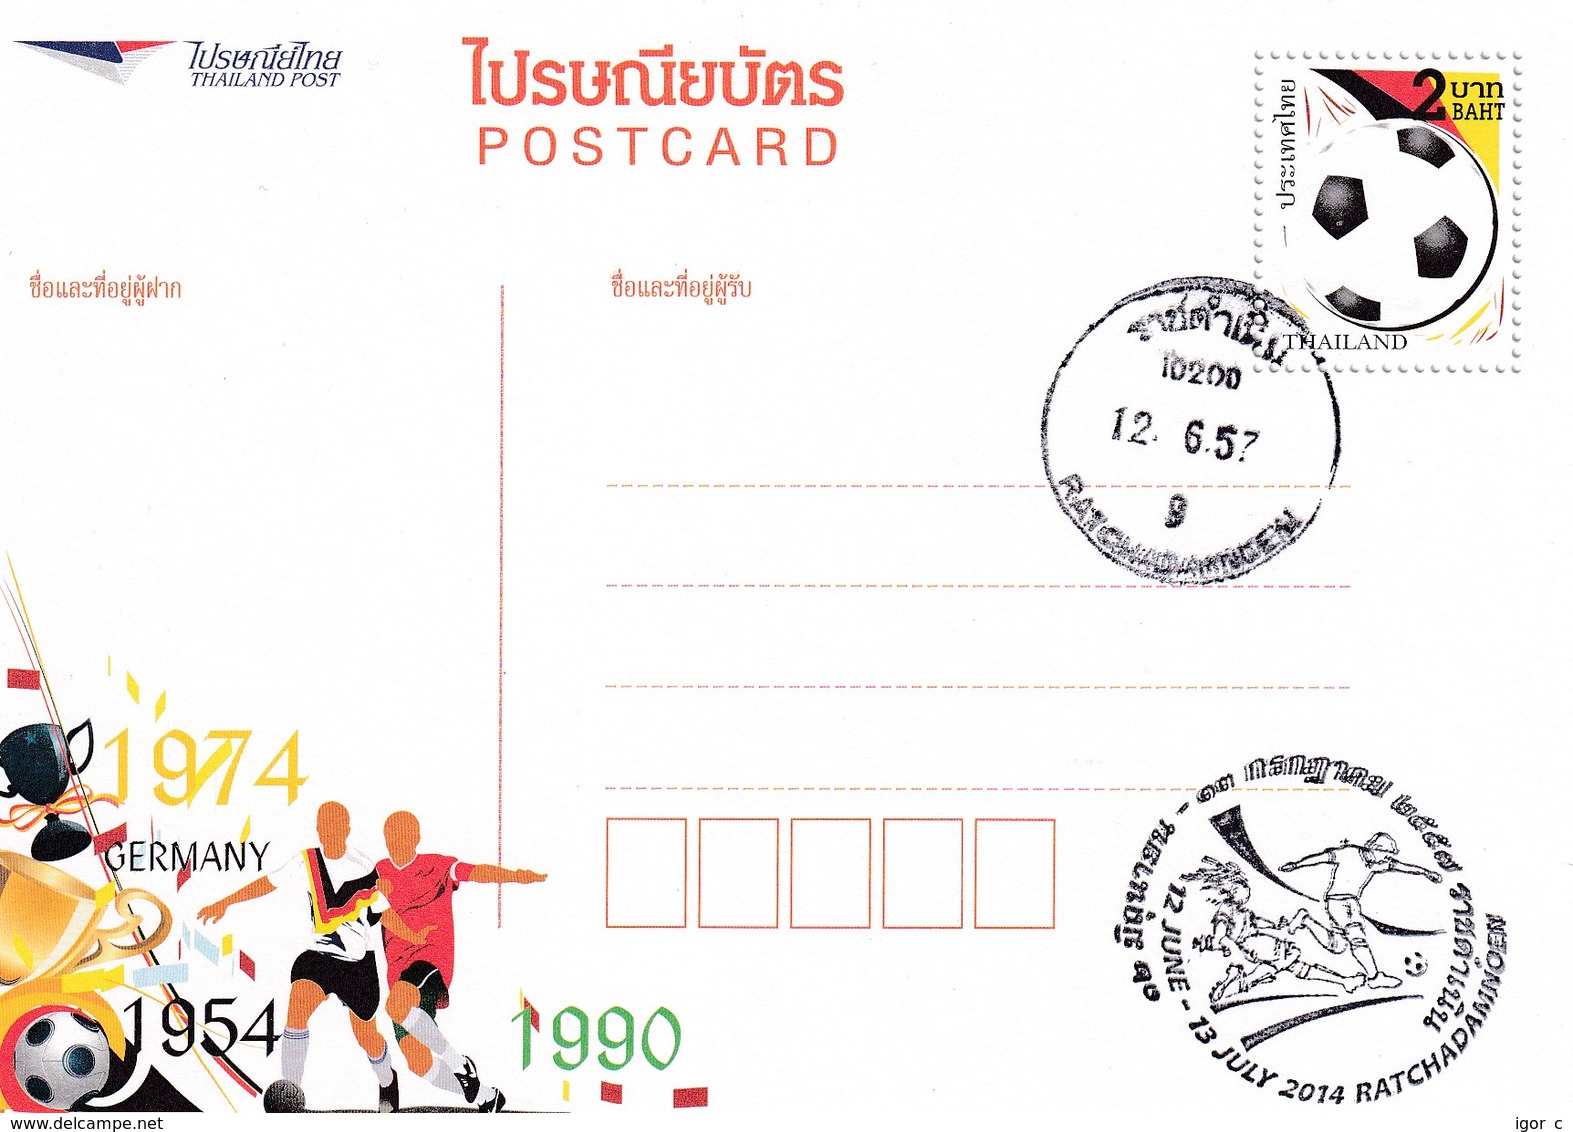 Thailand 2014 Postal Stationery Card: Football Fussball Soccer Calcio; FIFA World Cup 1954 1974 1990 Germany Champion - 1954 – Suisse